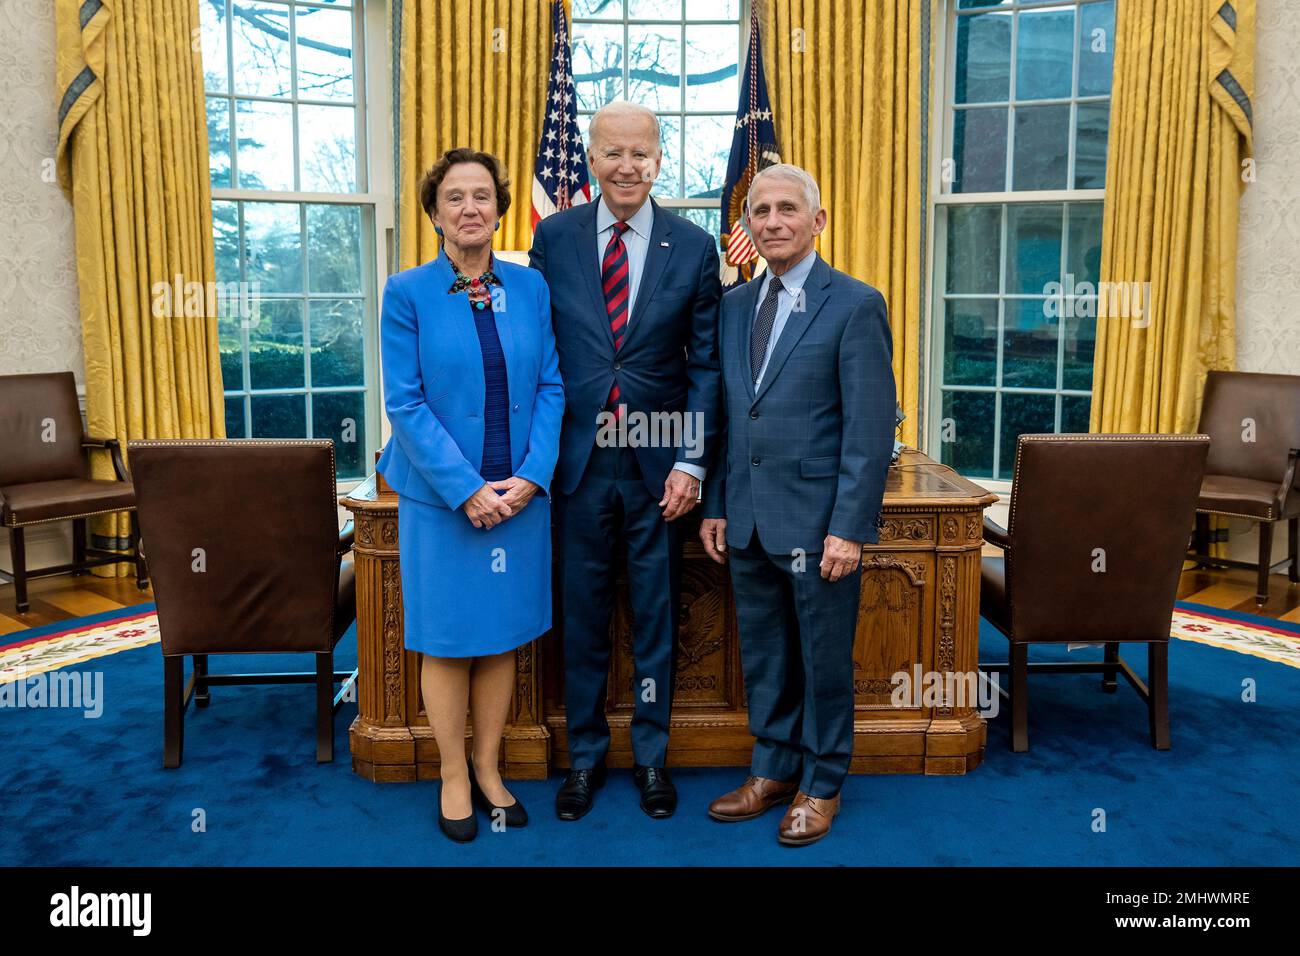 Washington, United States of America. 24 January, 2023. U.S President Joe Biden poses with his former Chief Medical Adviser Dr. Anthony Fauci and his wife Dr. Christine Grady, left, in the Oval Office of the White House, January 24, 2023 in Washington, D.C.  Credit: Erin Scott/White House Photo/Alamy Live News Stock Photo